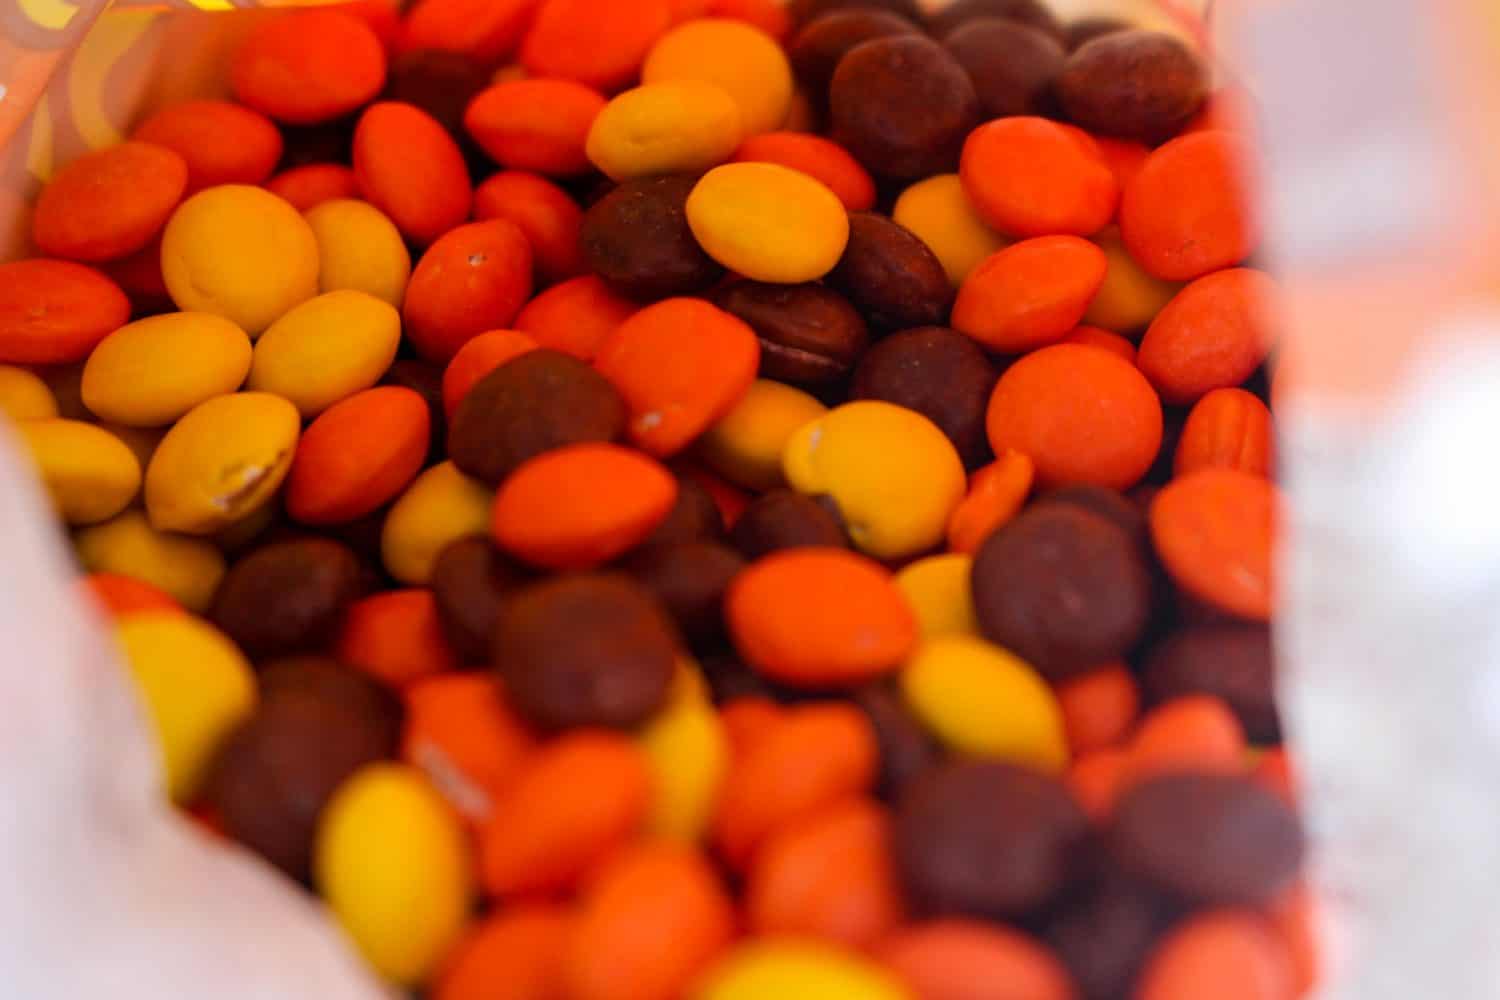 Reese’s pieces chocolate candy